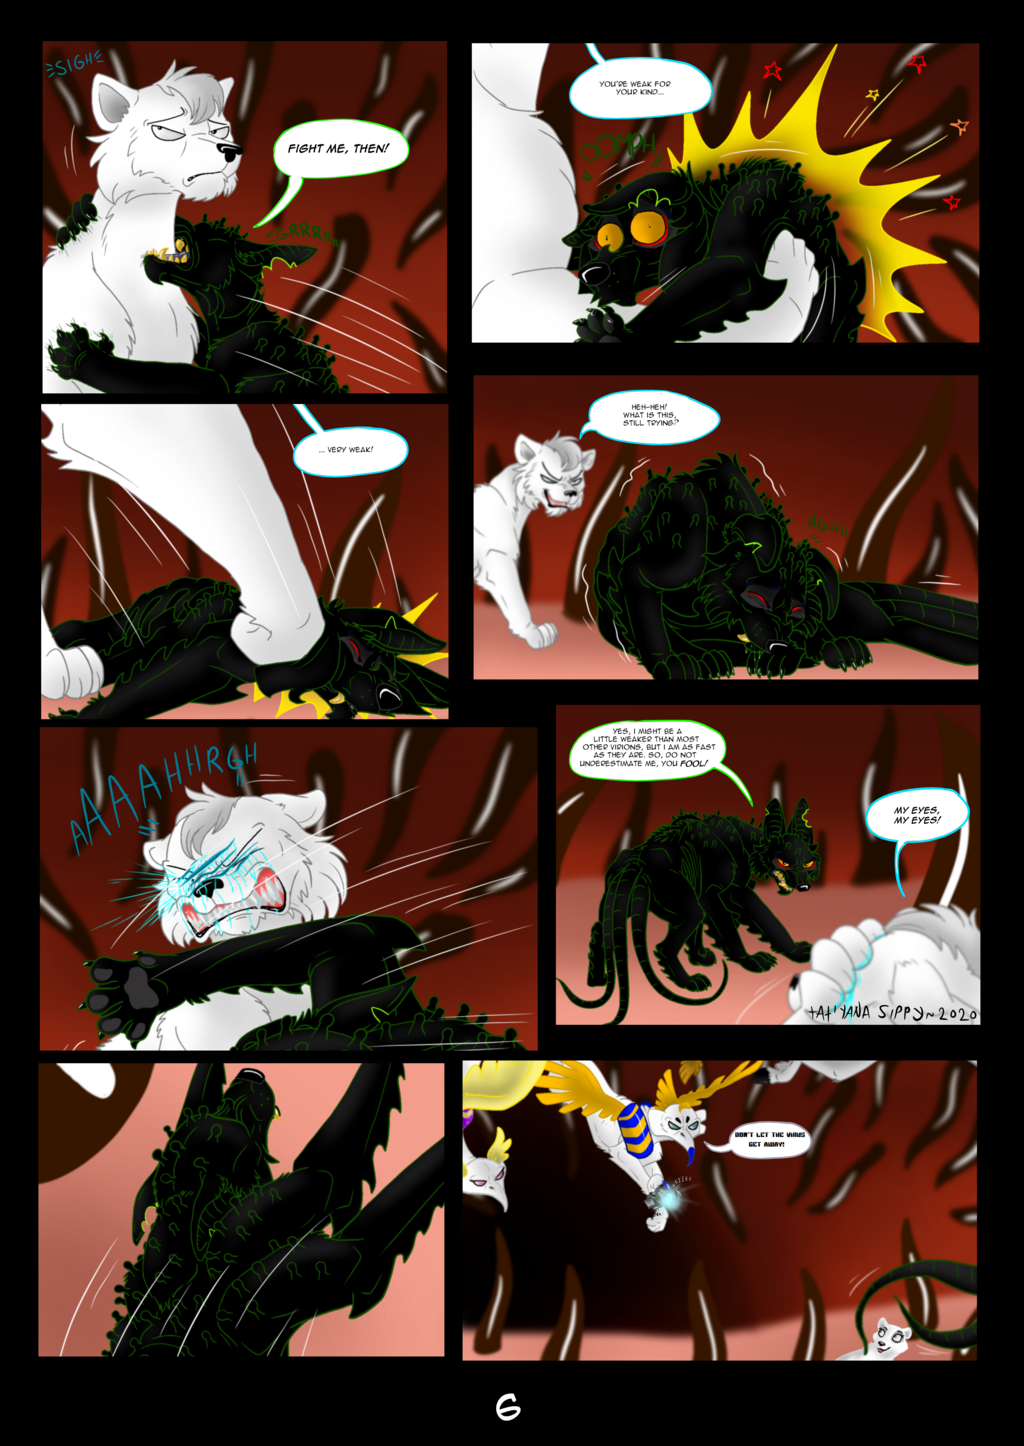 Most recent image: Virus Attack-page 6